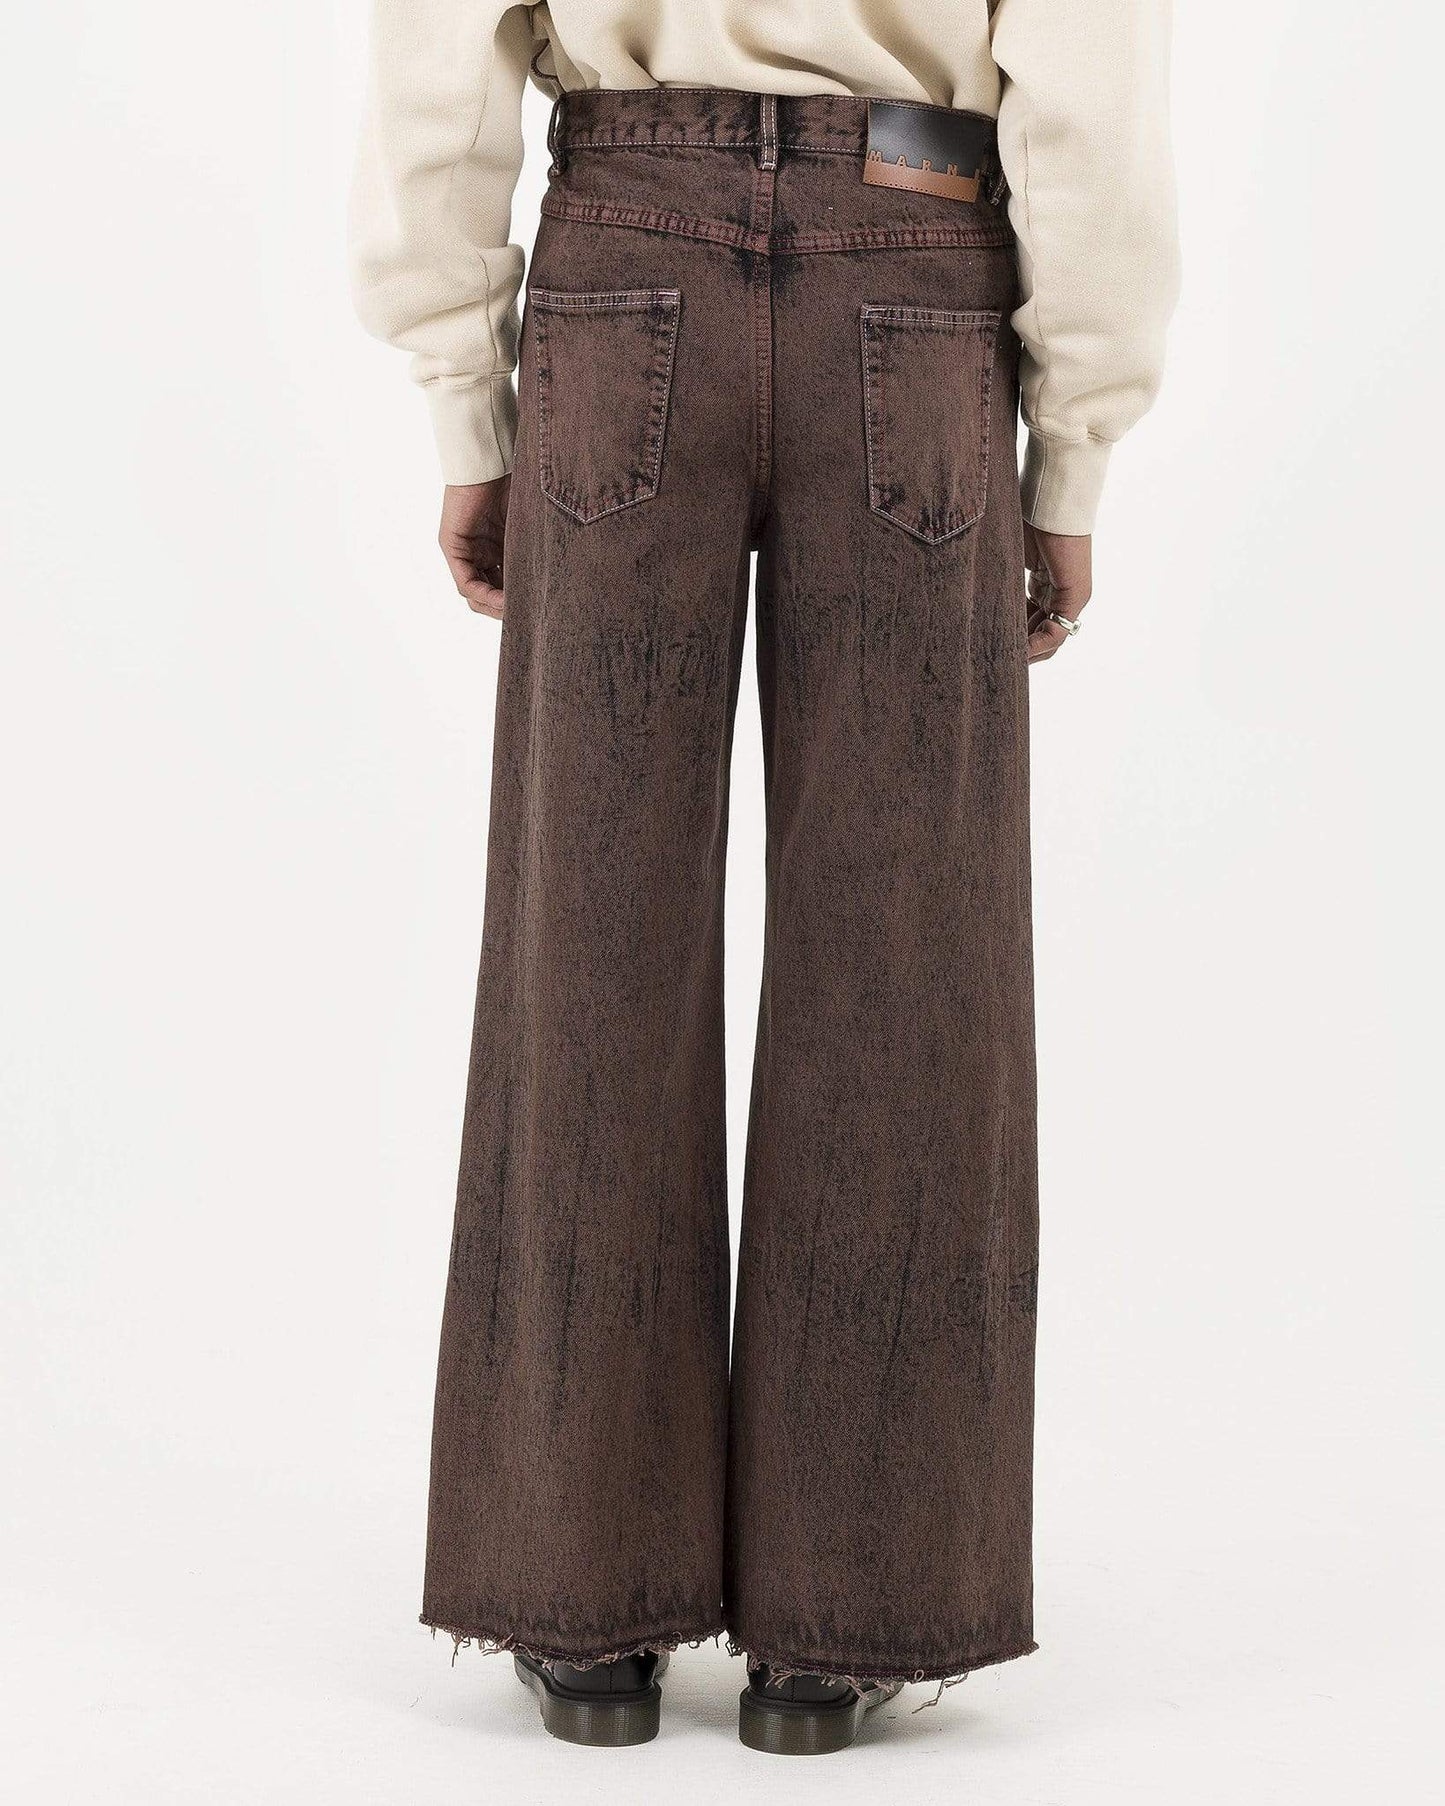 Marni Men's Jeans Faded Loose-fit Jeans in Burgundy